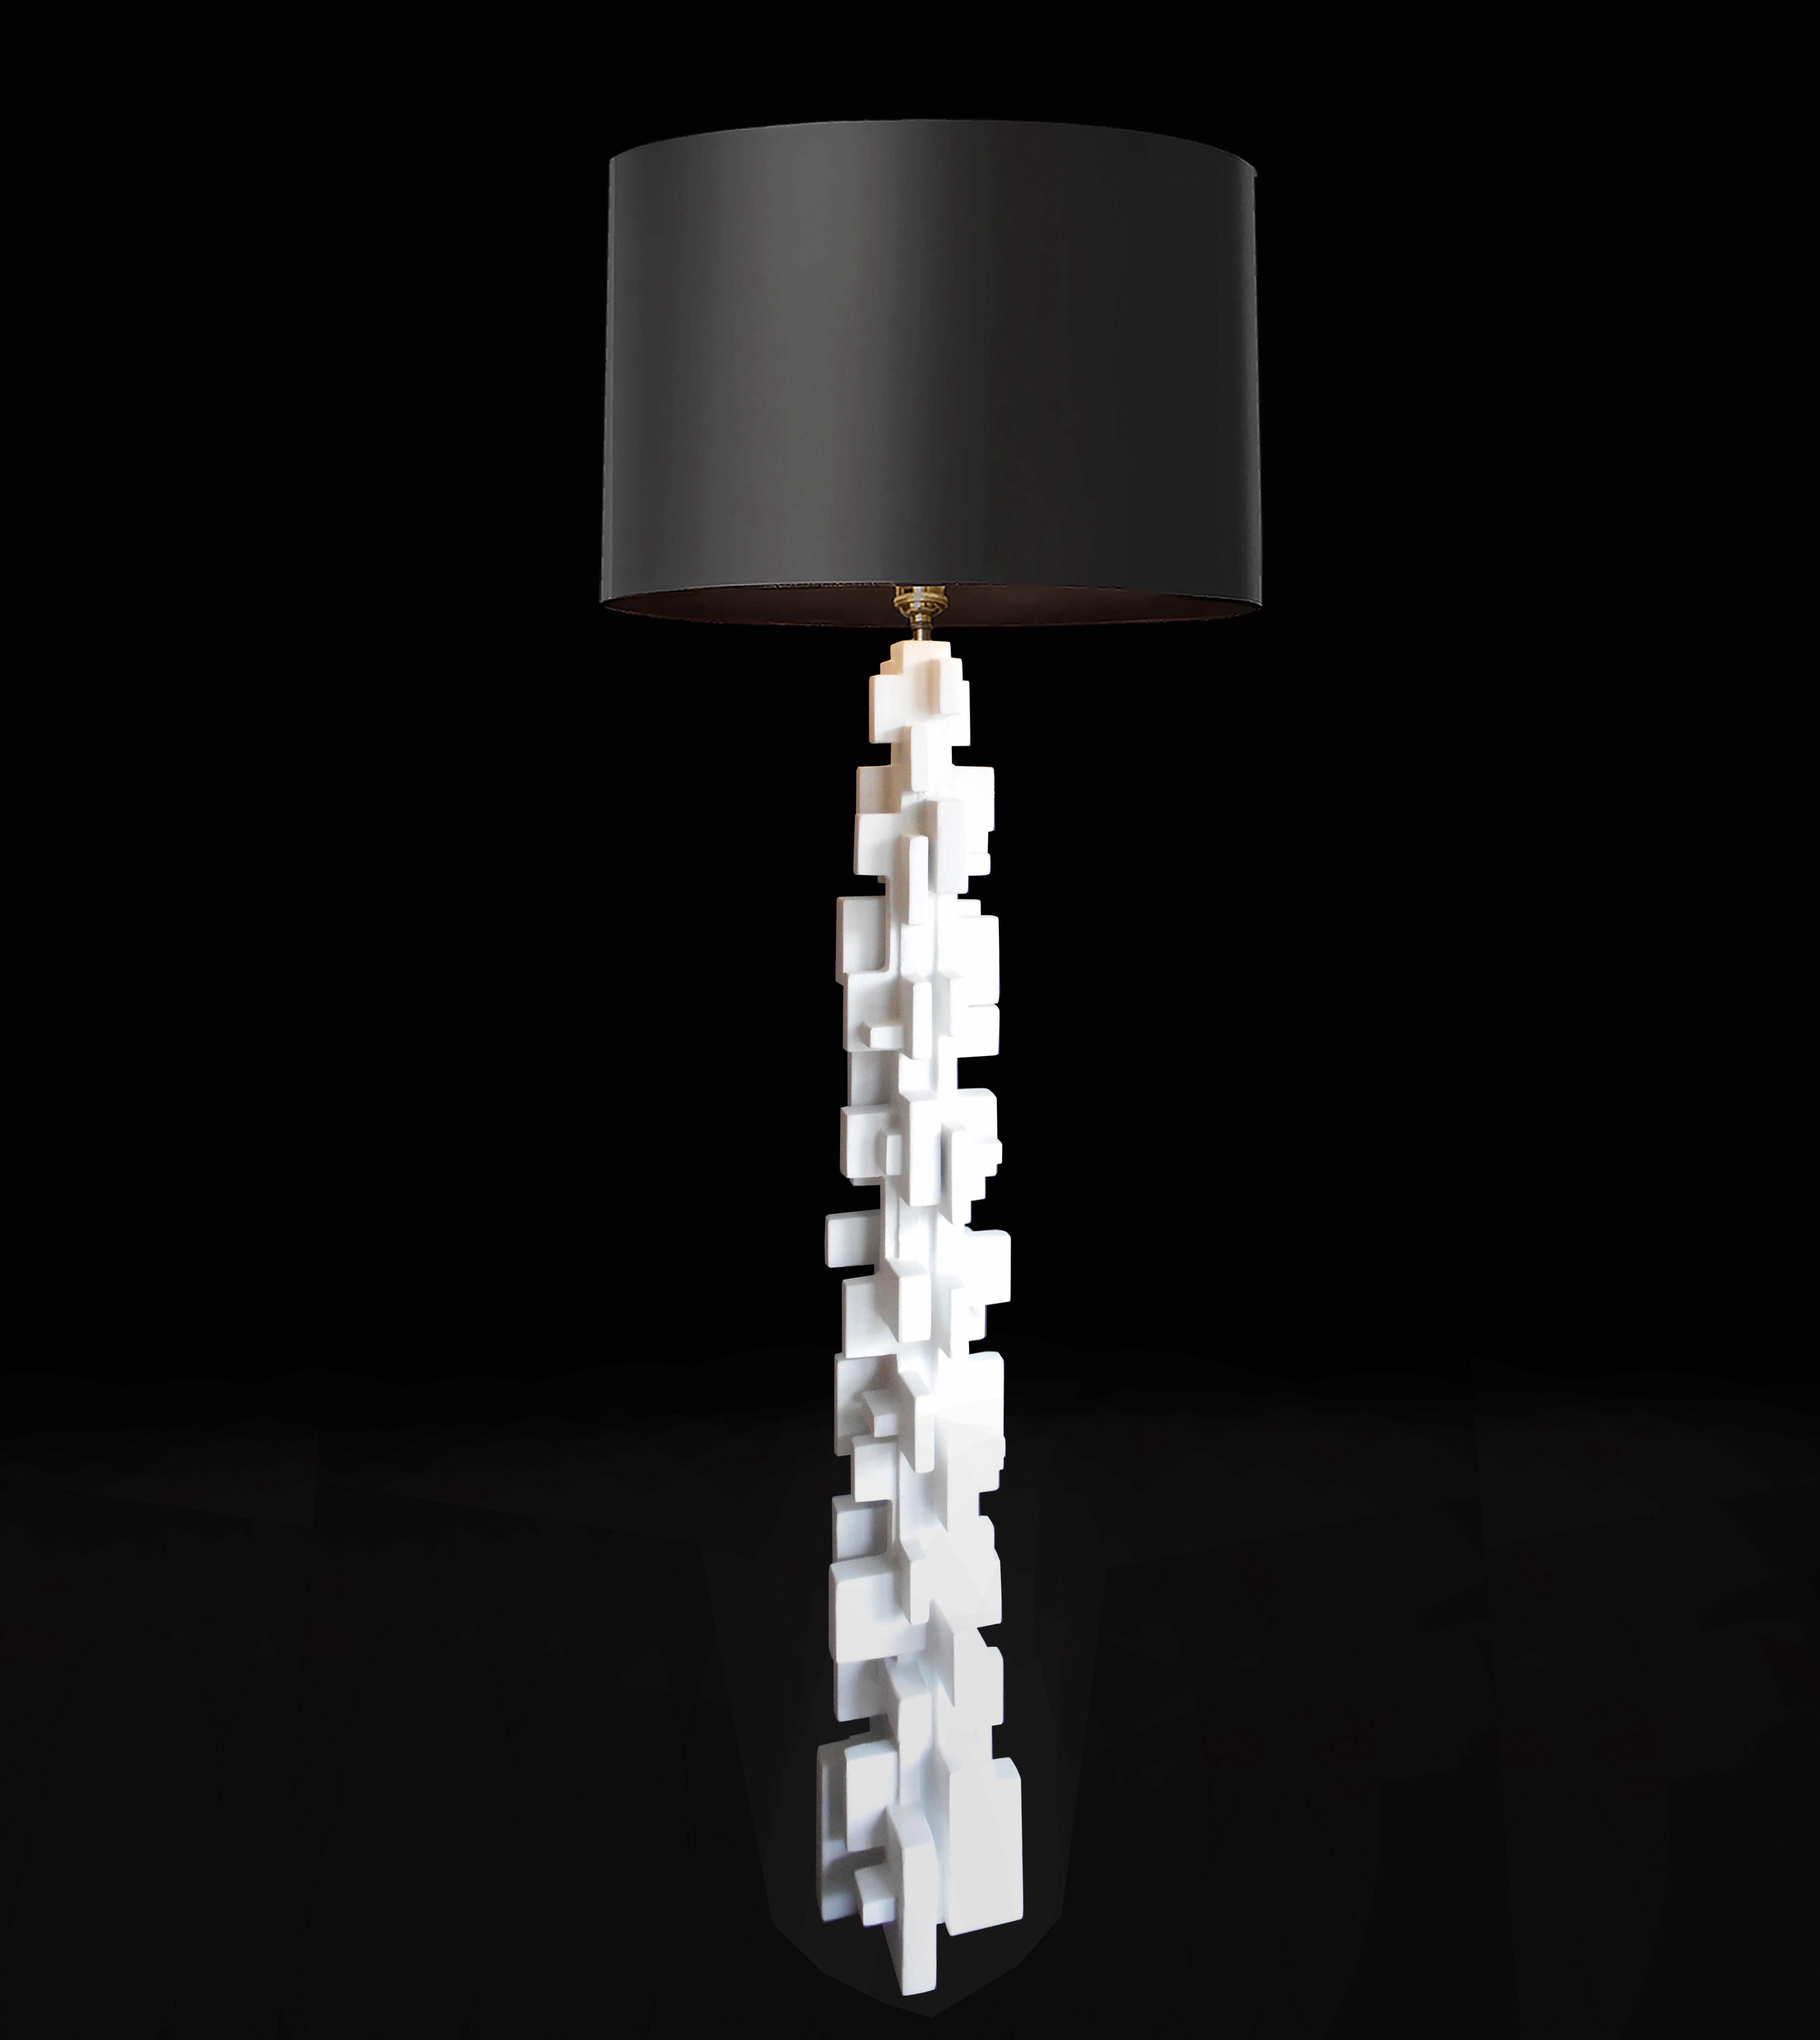 Babel Floor Lamp by Daniel Schneiger.
Dimensions: D 23 x W 23 x H 132 cm.
Materials: Wood and resin.
Shade not included. Custom finishes available. 

All our lamps can be wired according to each country. If sold to the USA it will be wired for